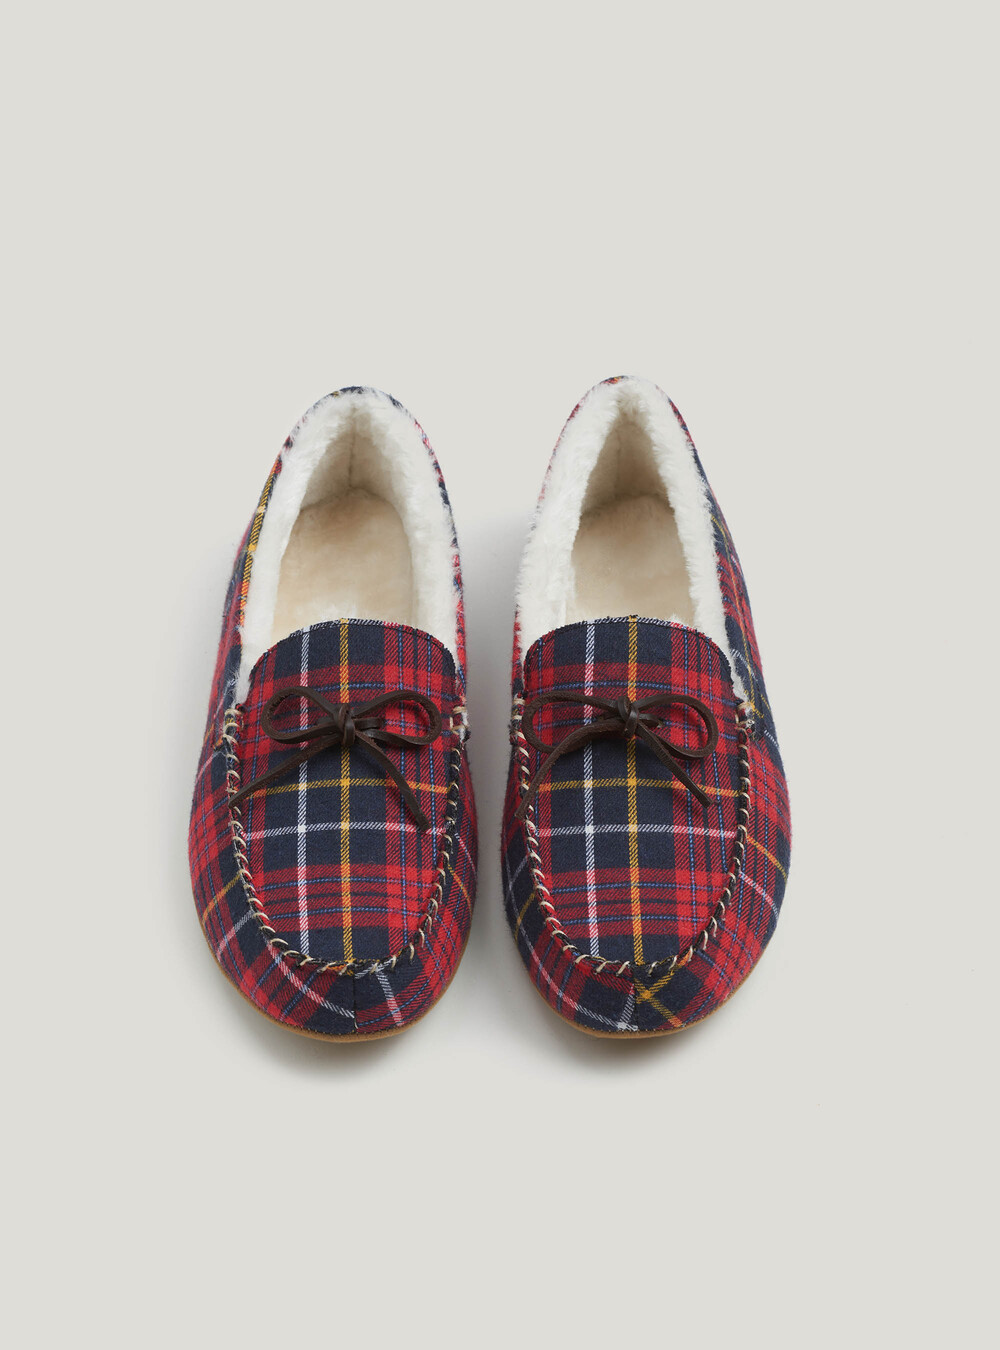 Plaid flannel slippers